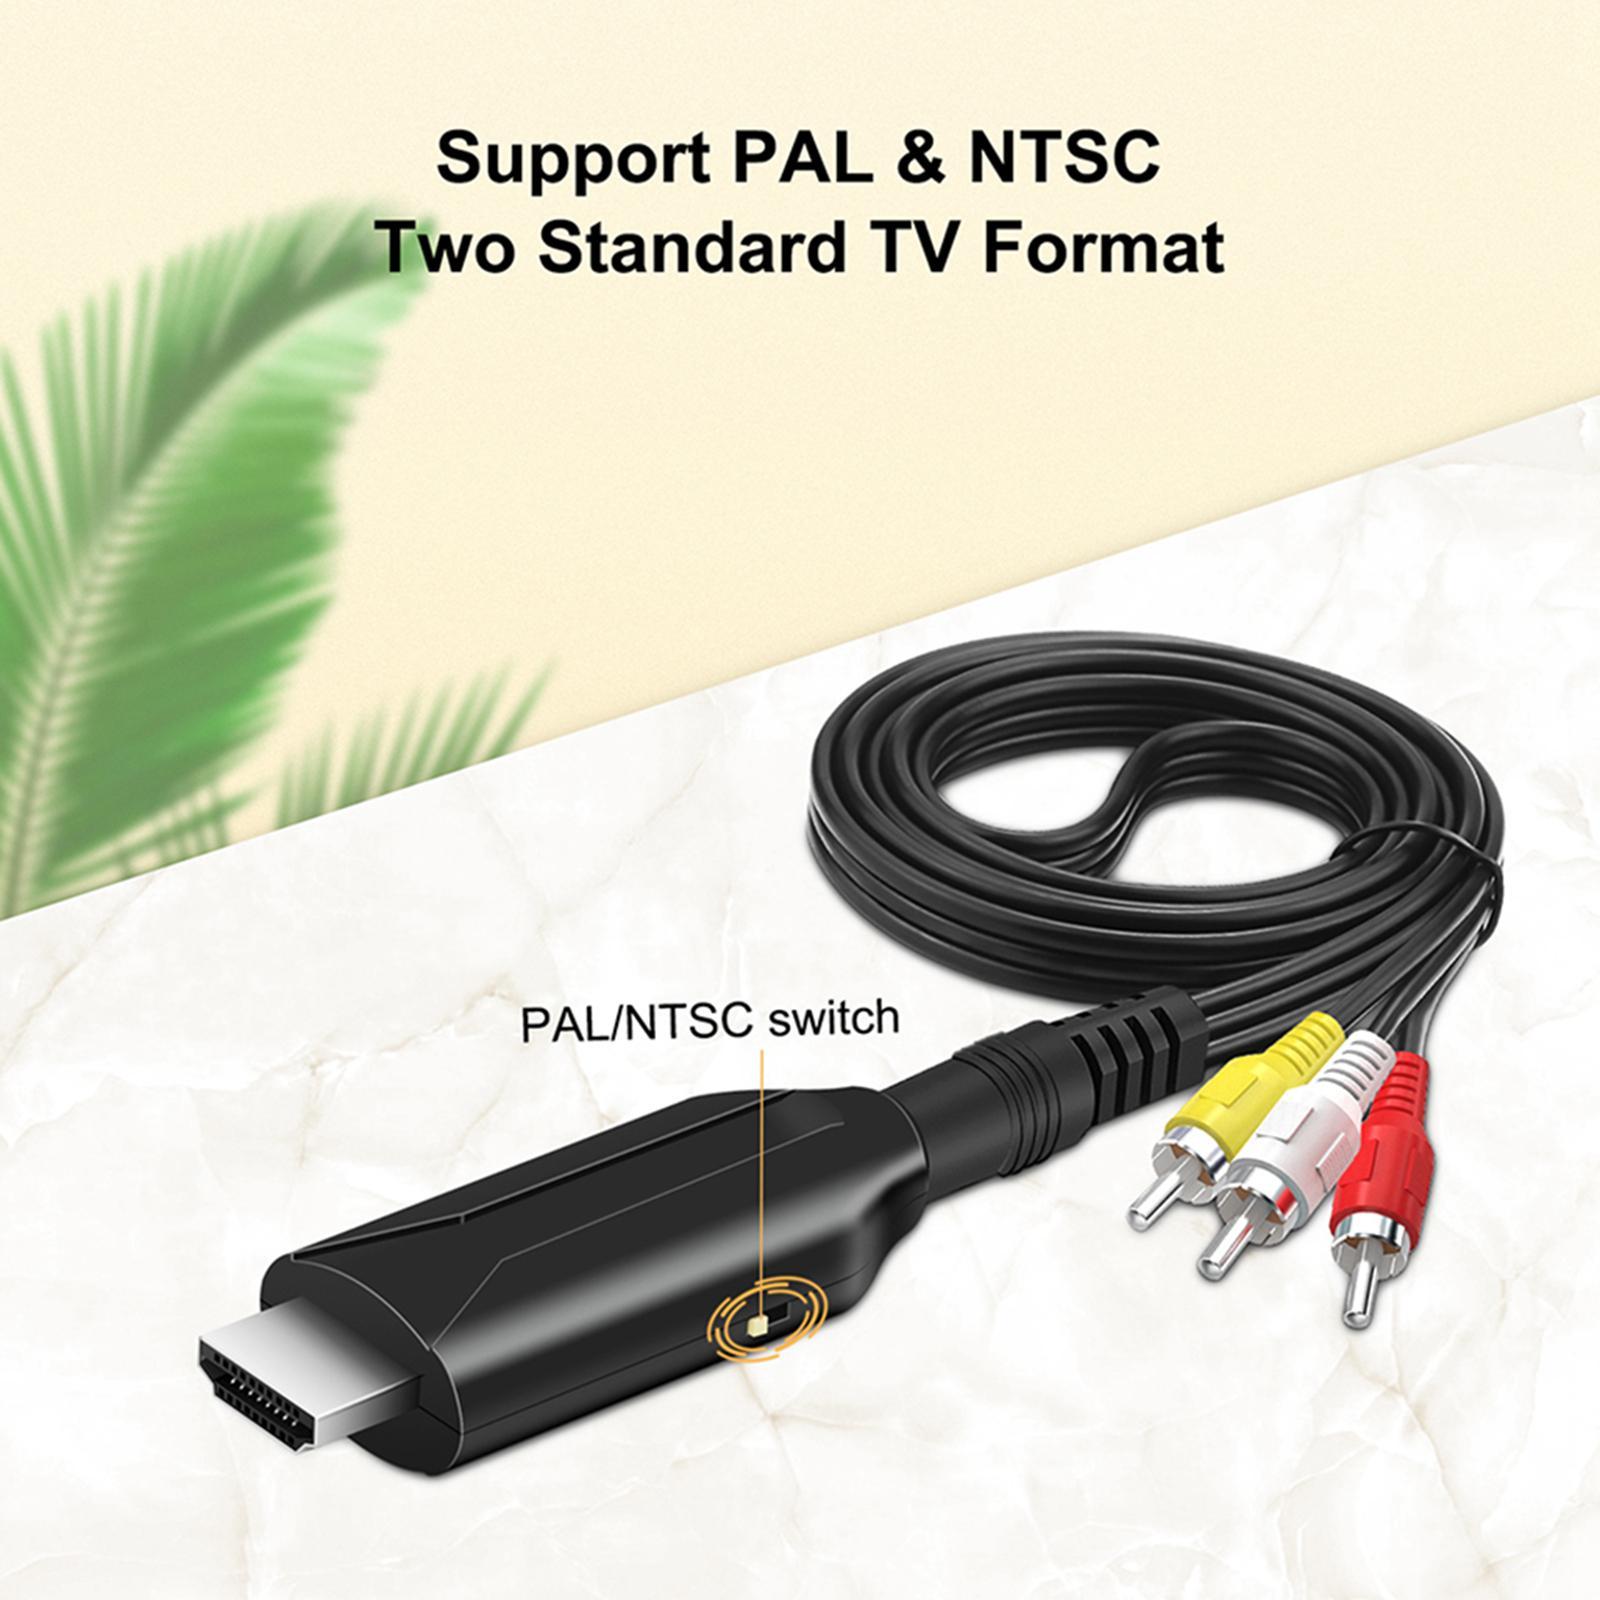 Video Audio Cable Accessory Supports PaL Ntsc Replaces for TV